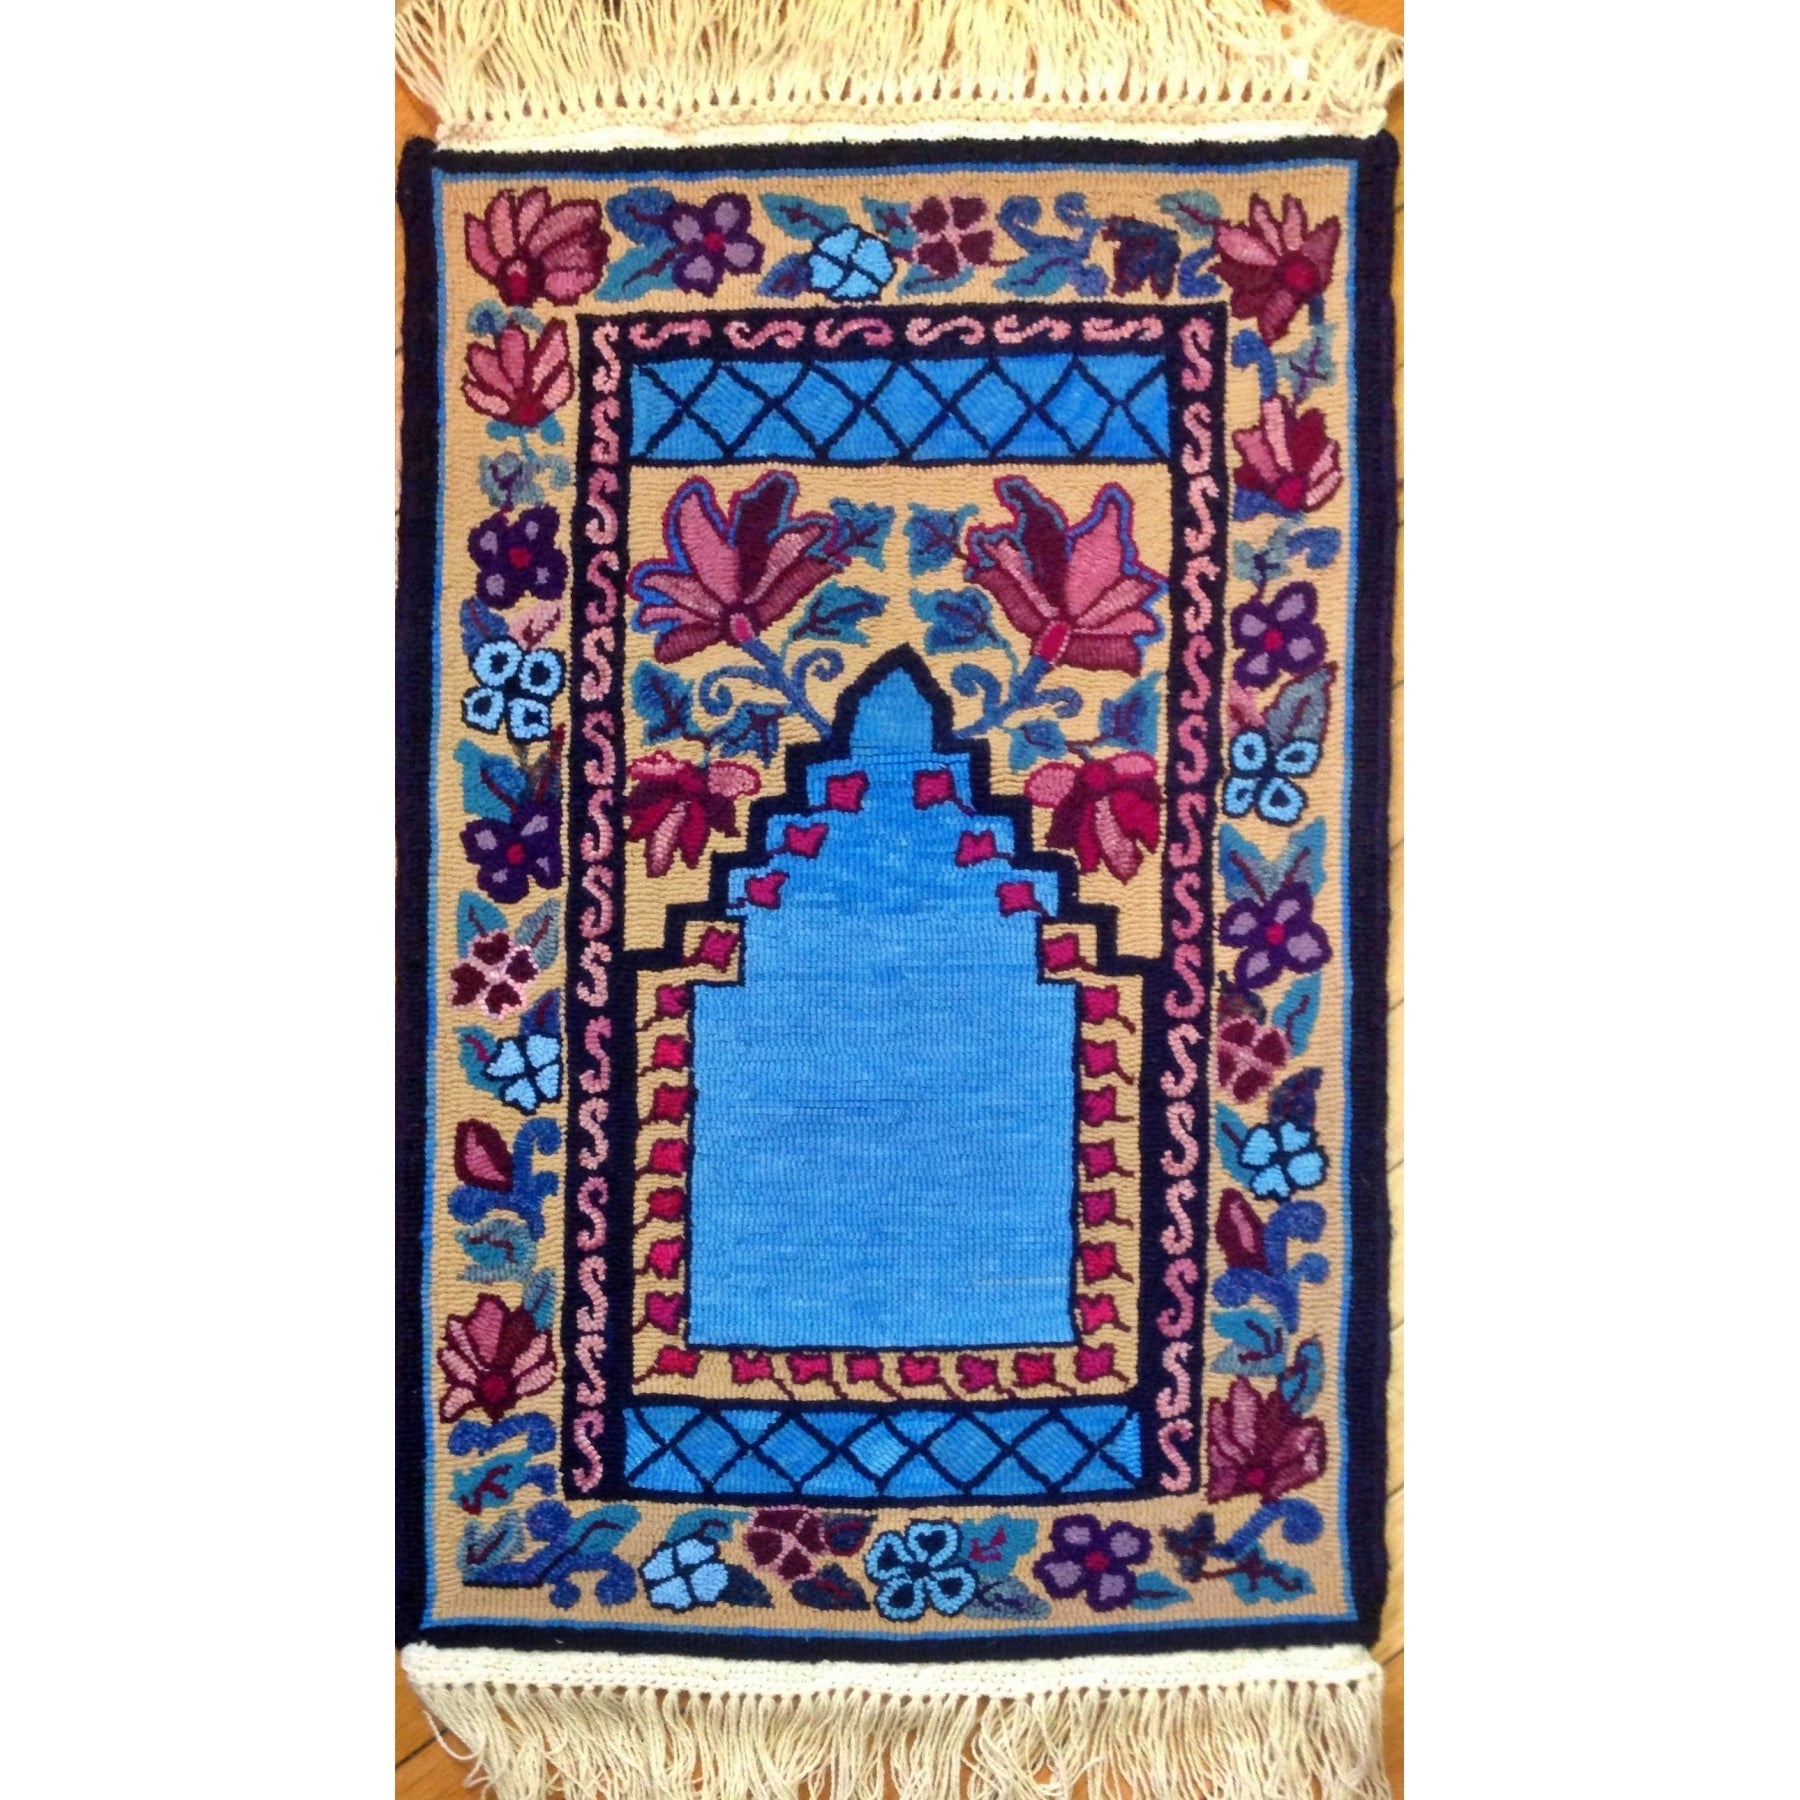 Charity Prayer, rug hooked by Vicky Germroth